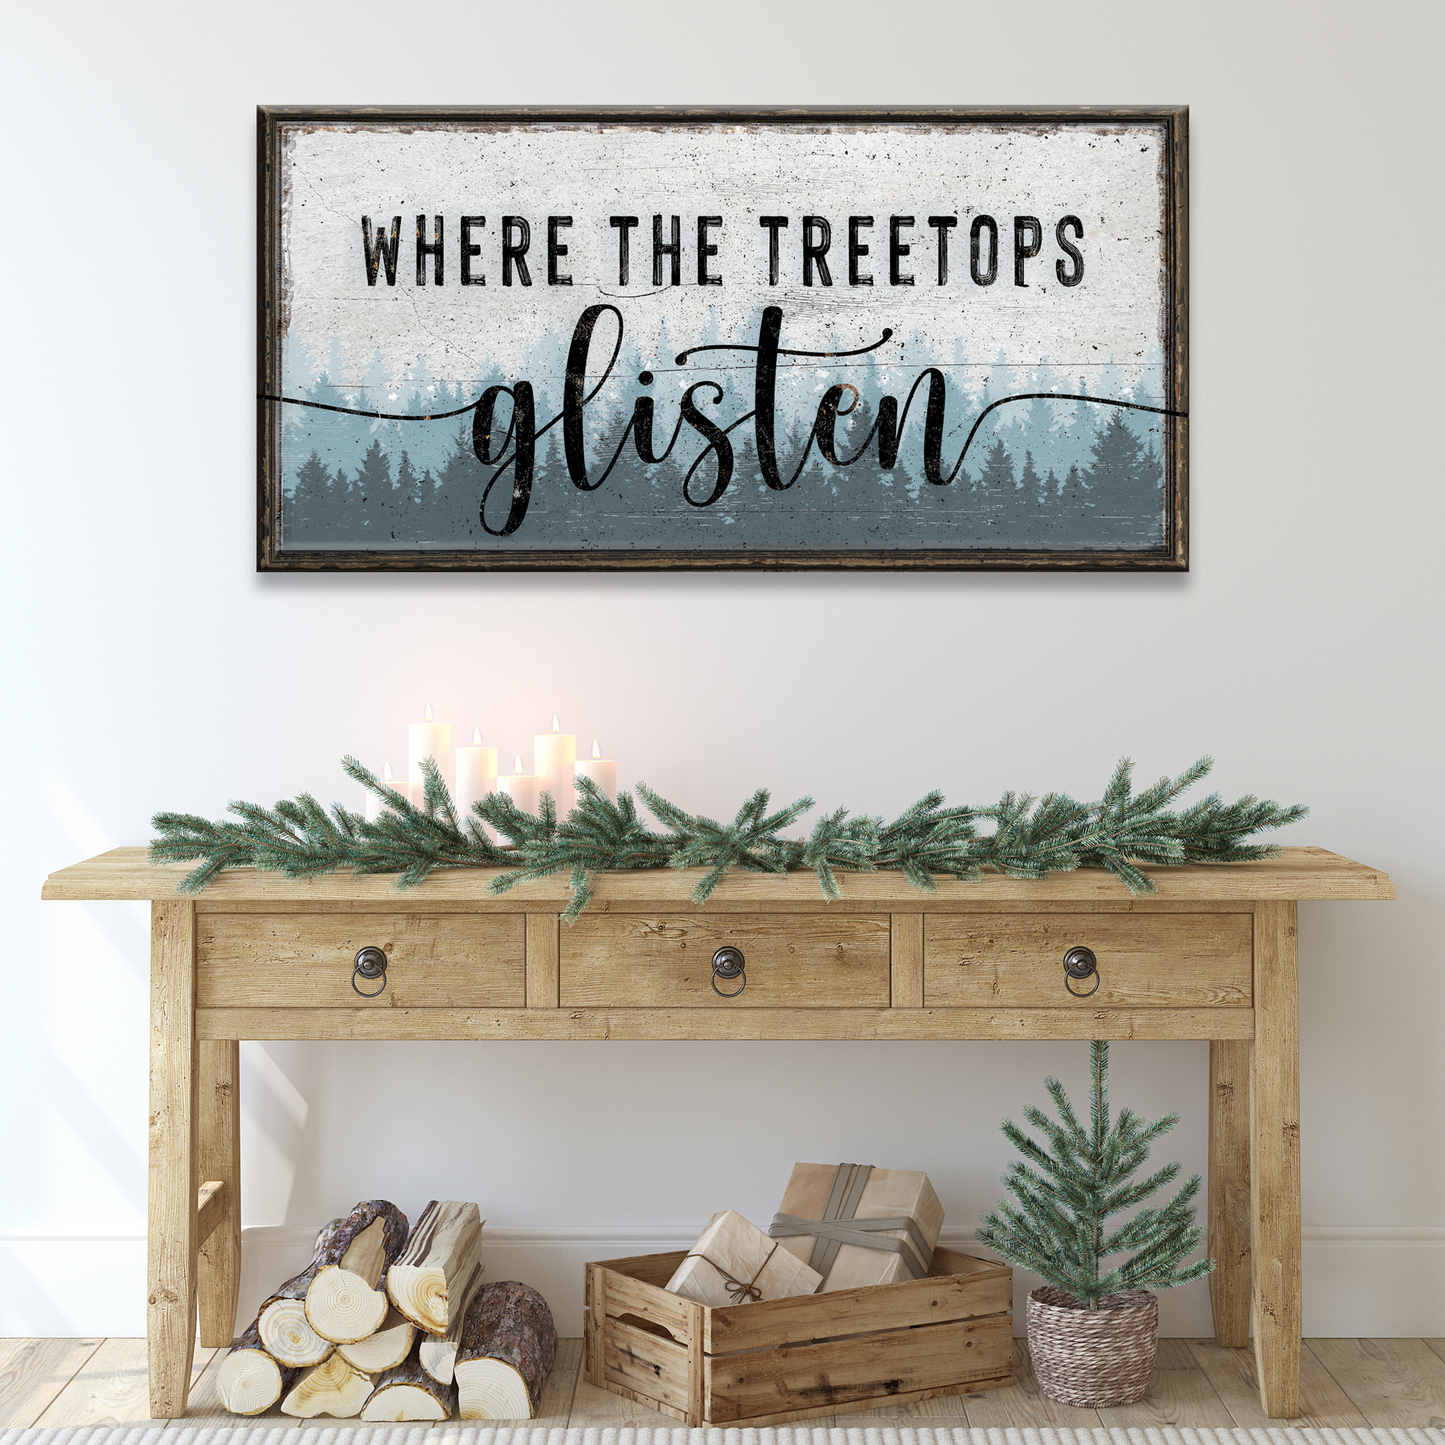 Where The Treetops Glisten Sign - Image by Tailored Canvases